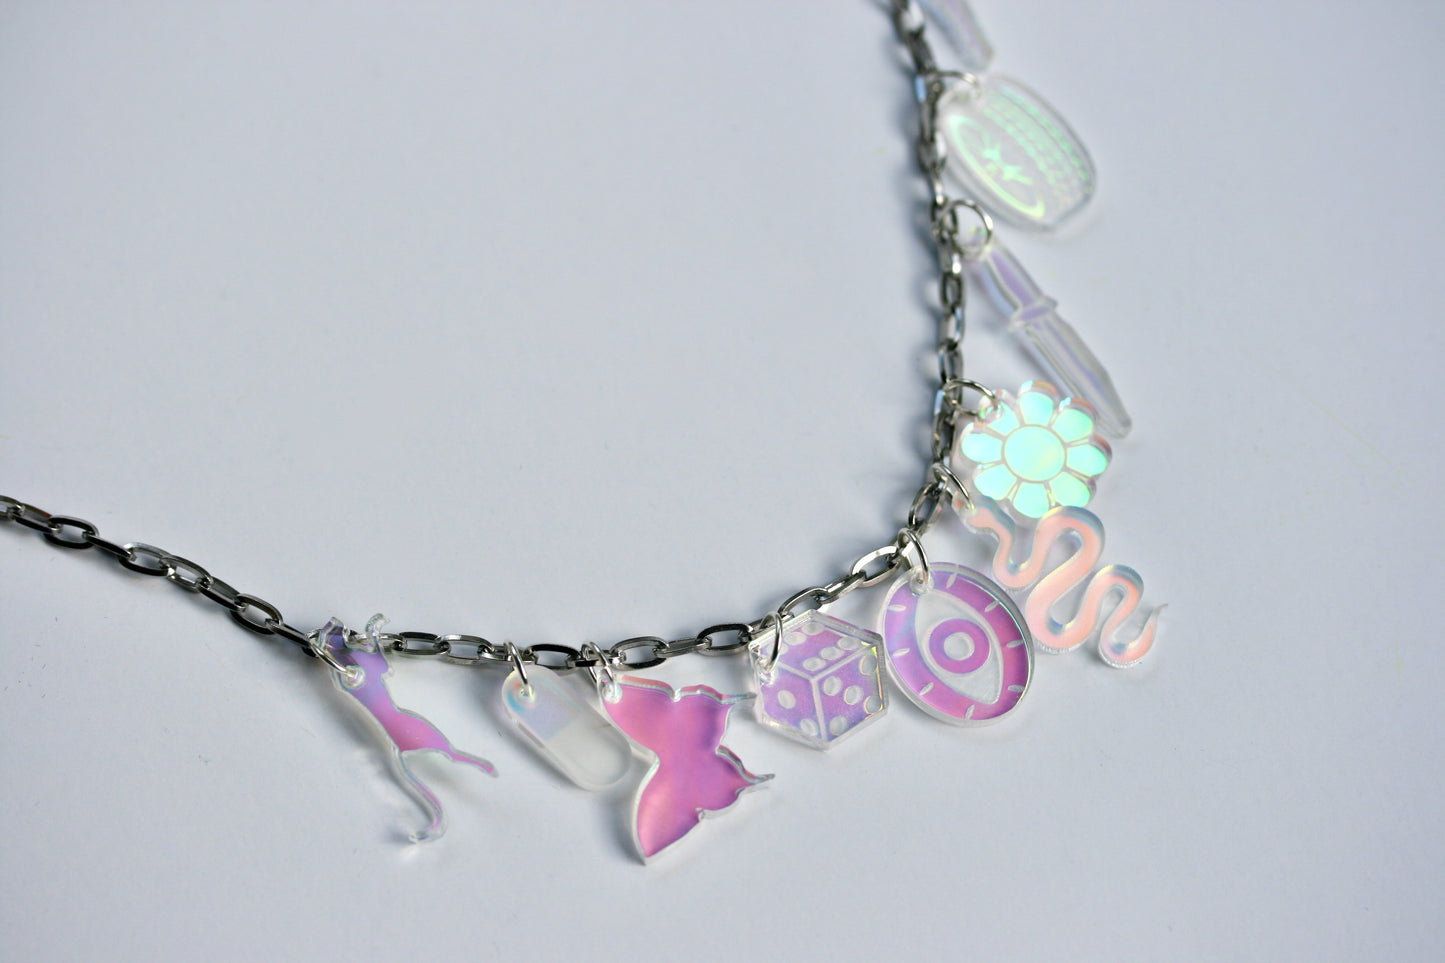 Iridescent Charm Necklace - Lasercut Holo Rainbow Multicolor Detailed One of a Kind OOAK